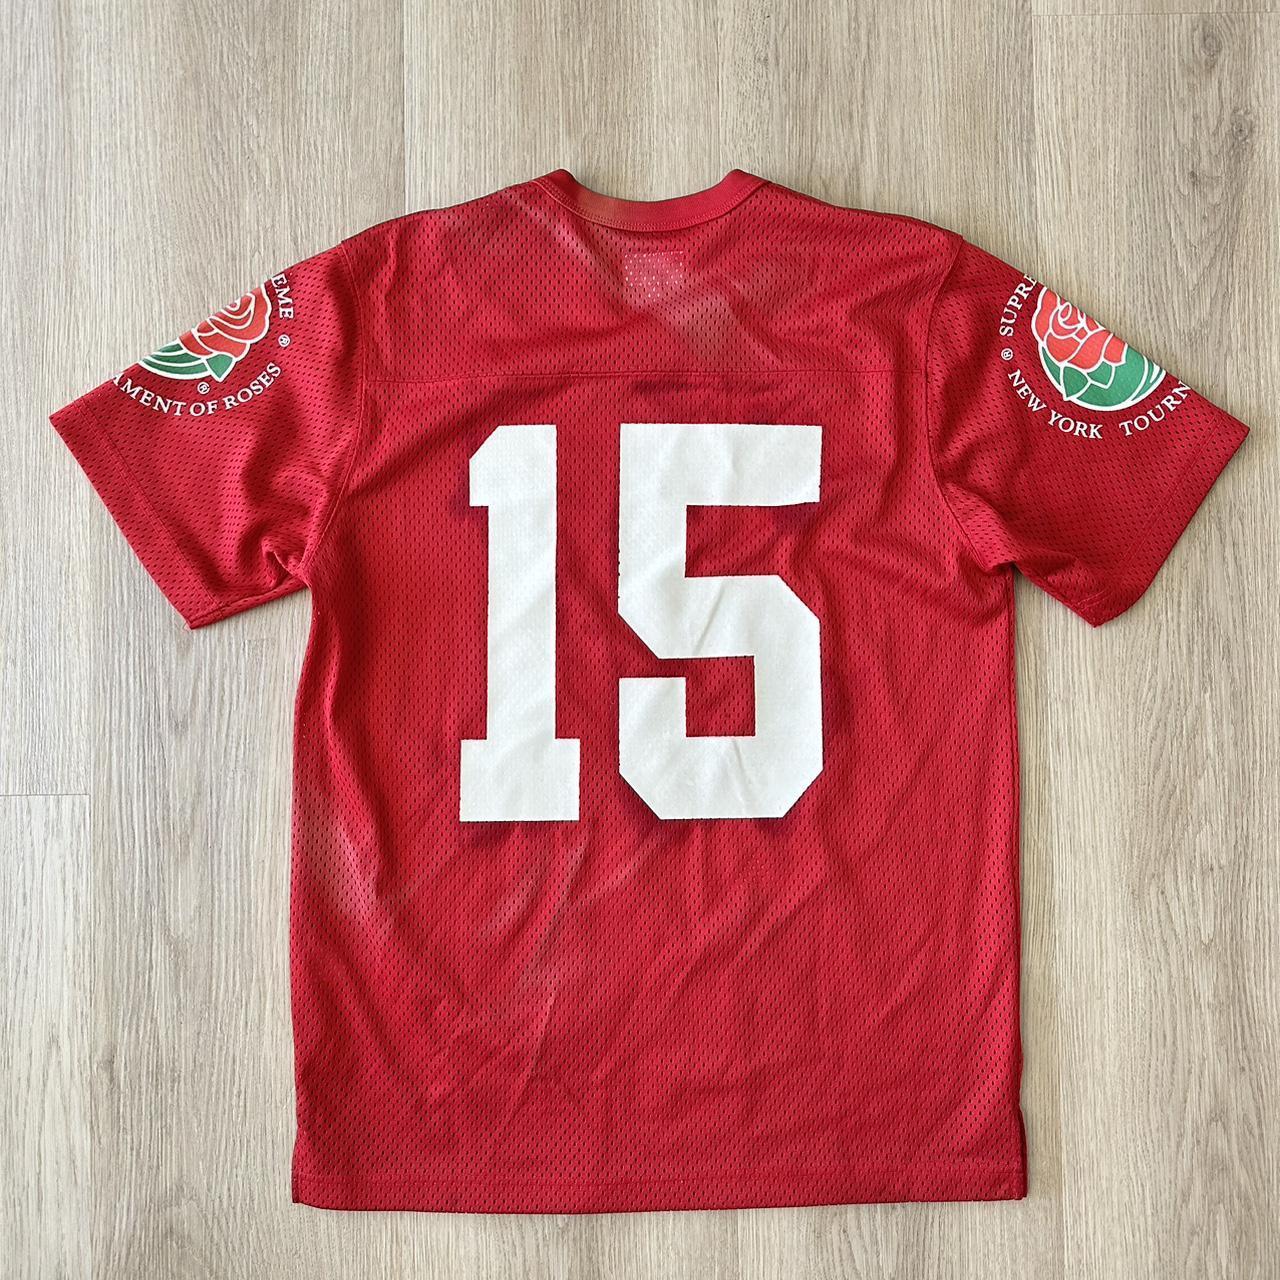 Supreme TOURNAMENT OF ROSES Football RED Jersey SZ